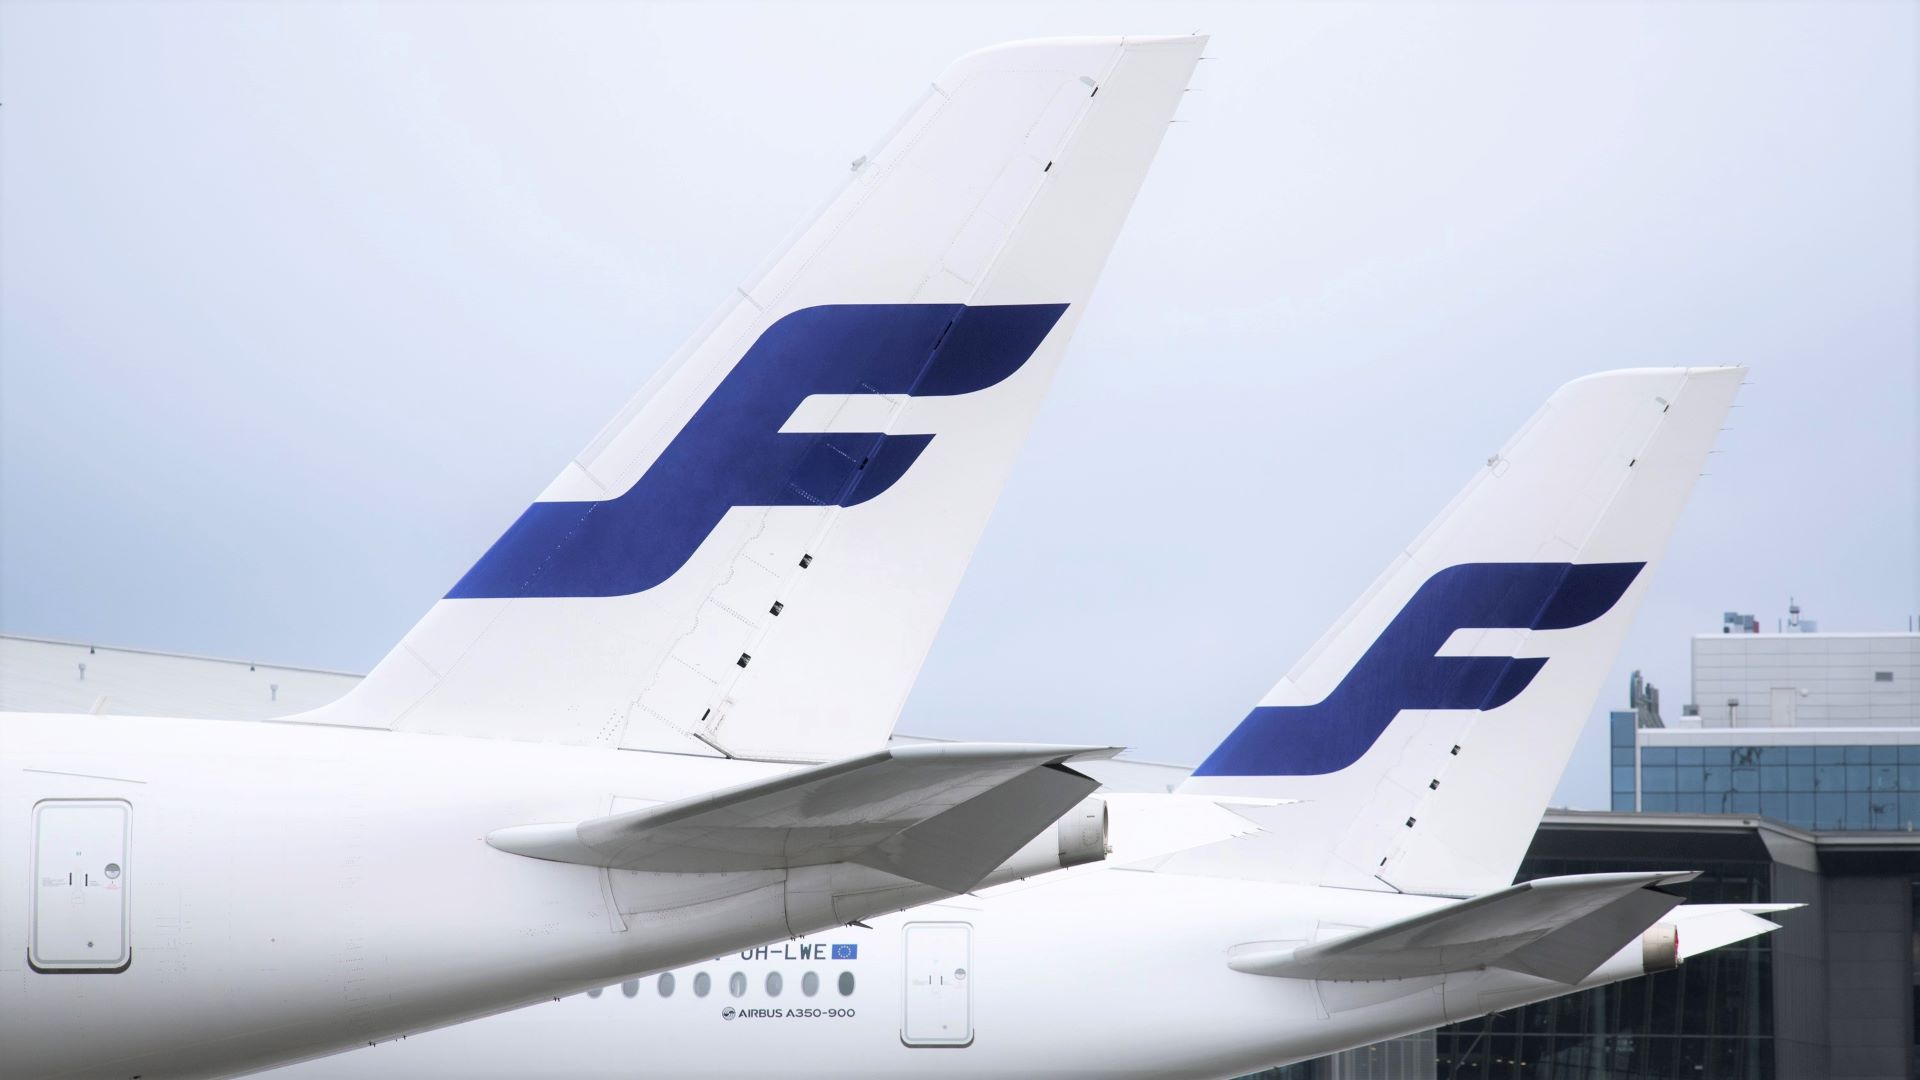 Tail shot of two Finnair jets with an "F" on the tail.